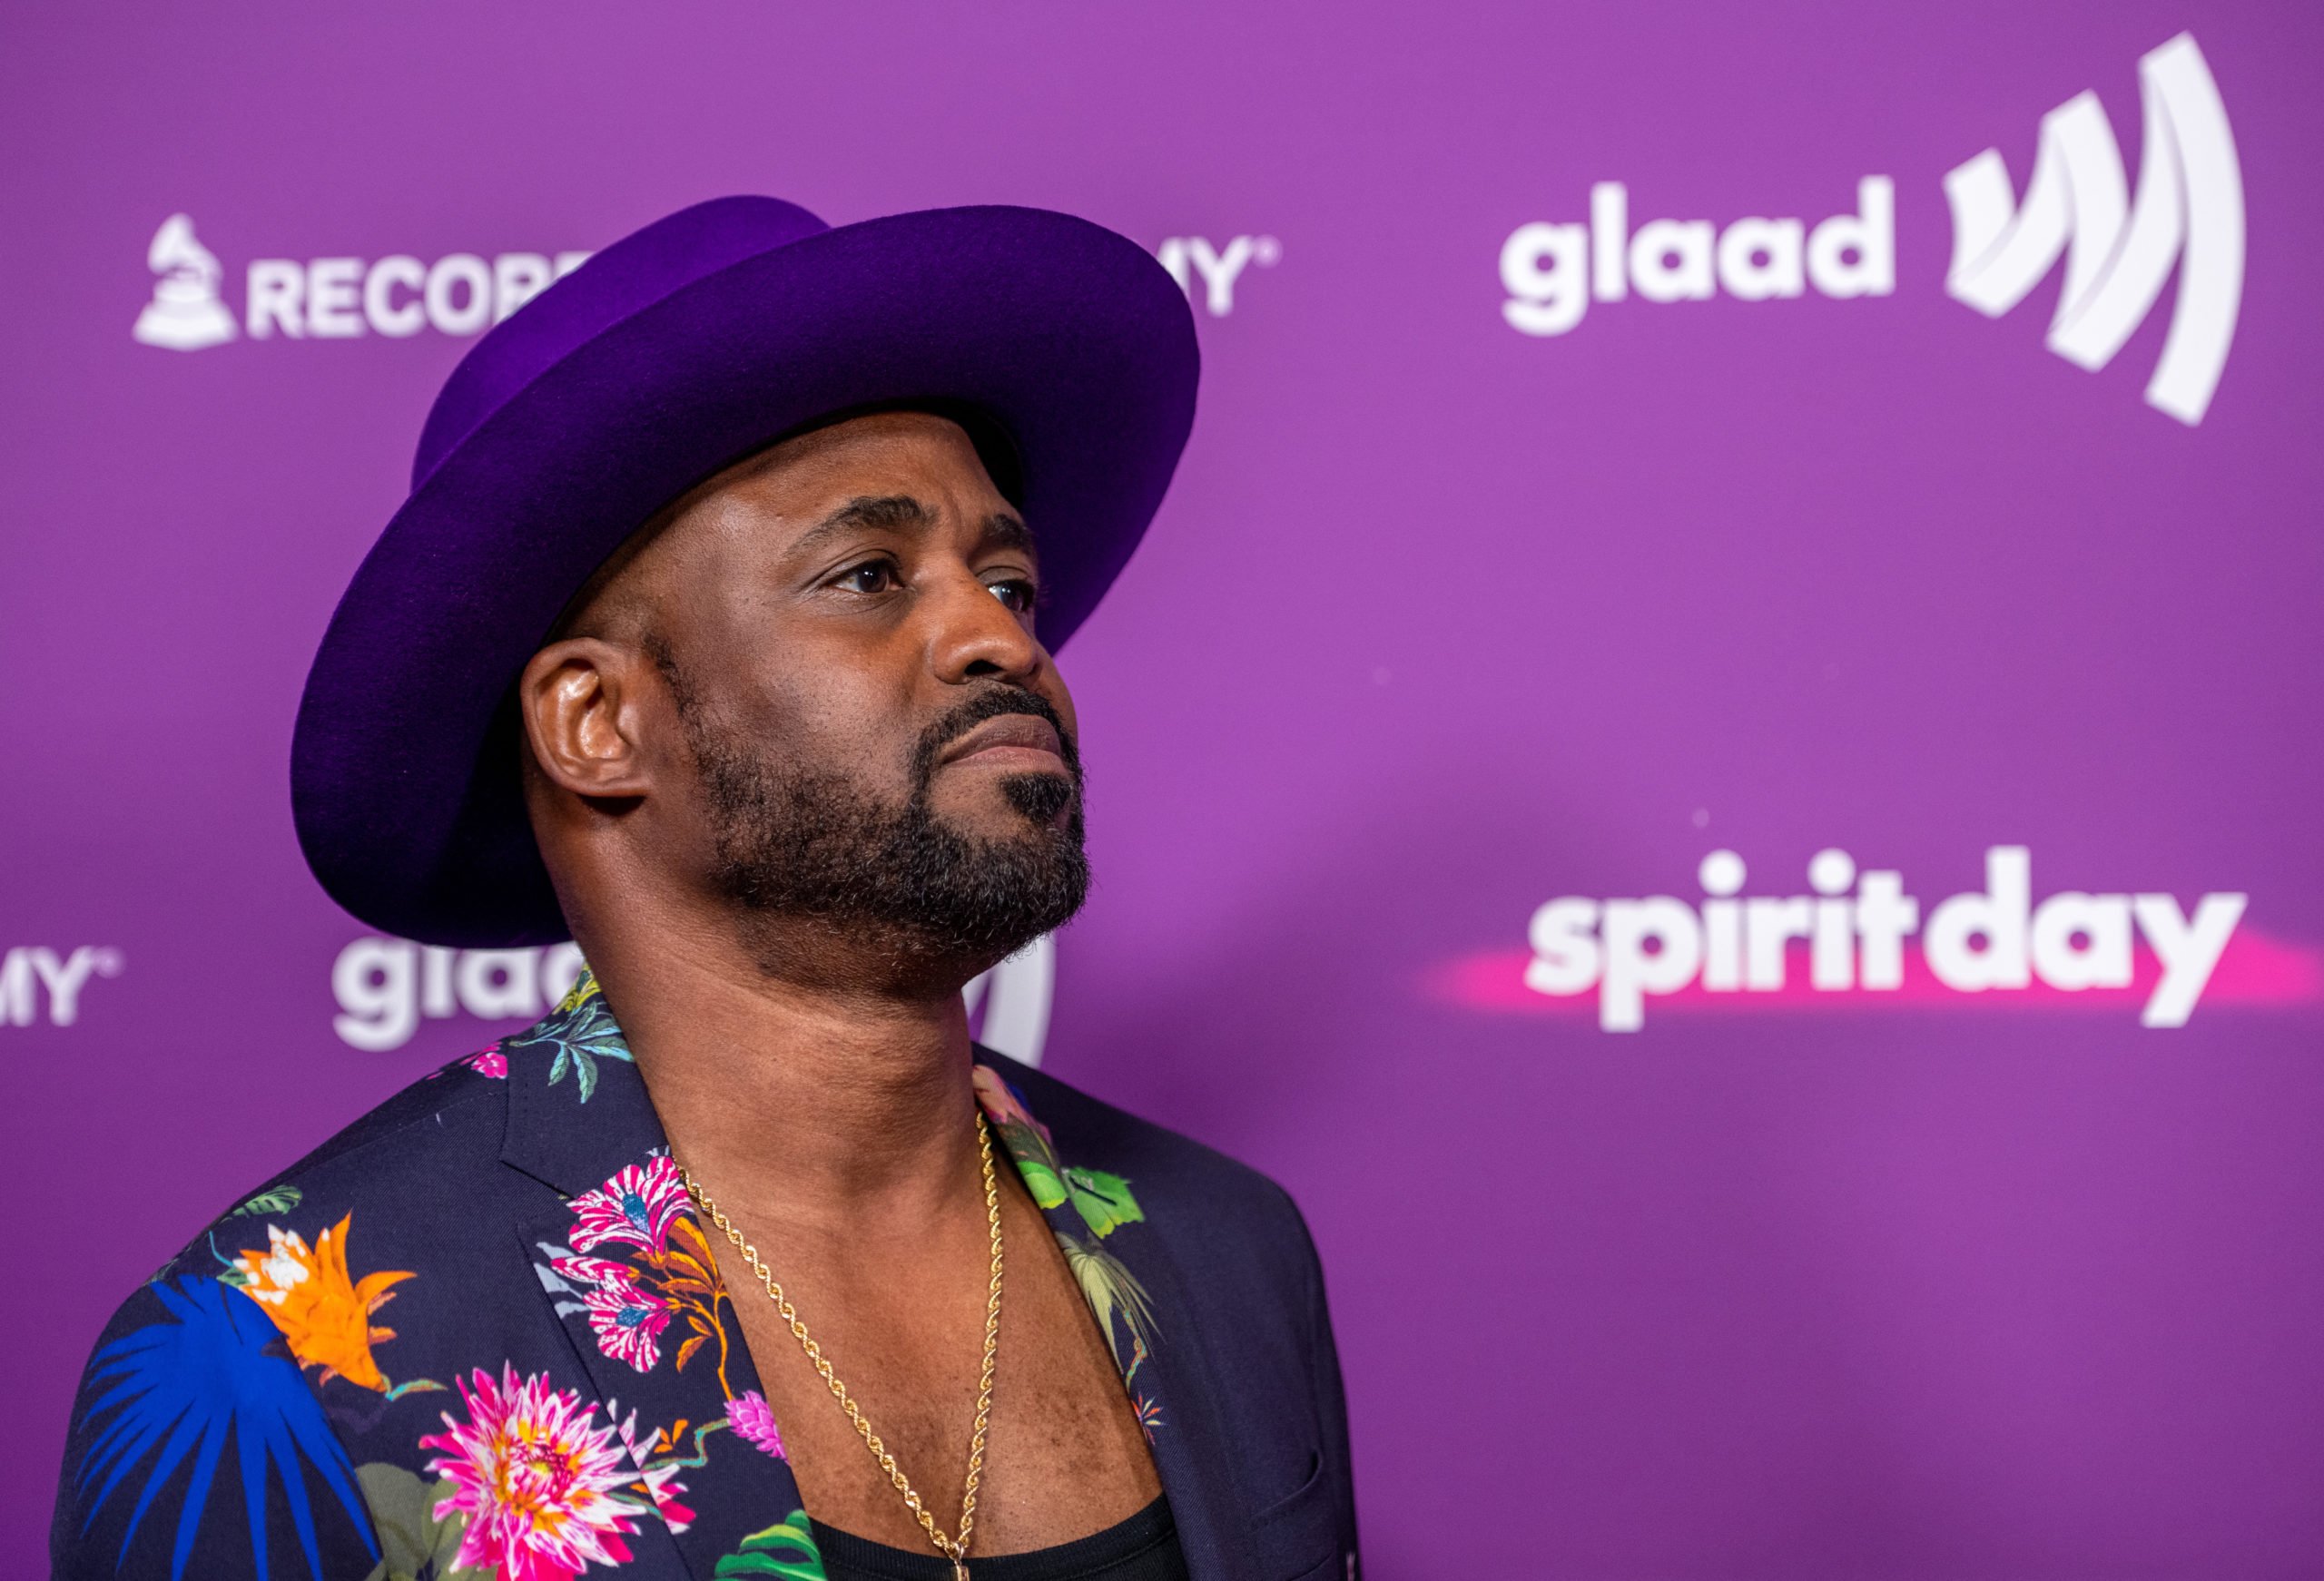 OS ANGELES, CALIFORNIA - OCTOBER 18: Comedian Wayne Brady attends GLAAD's 5th Annual #SpiritDay Concert at The Belasco on October 18, 2023 in Los Angeles, California. (Photo by Amanda Edwards/Getty Images)